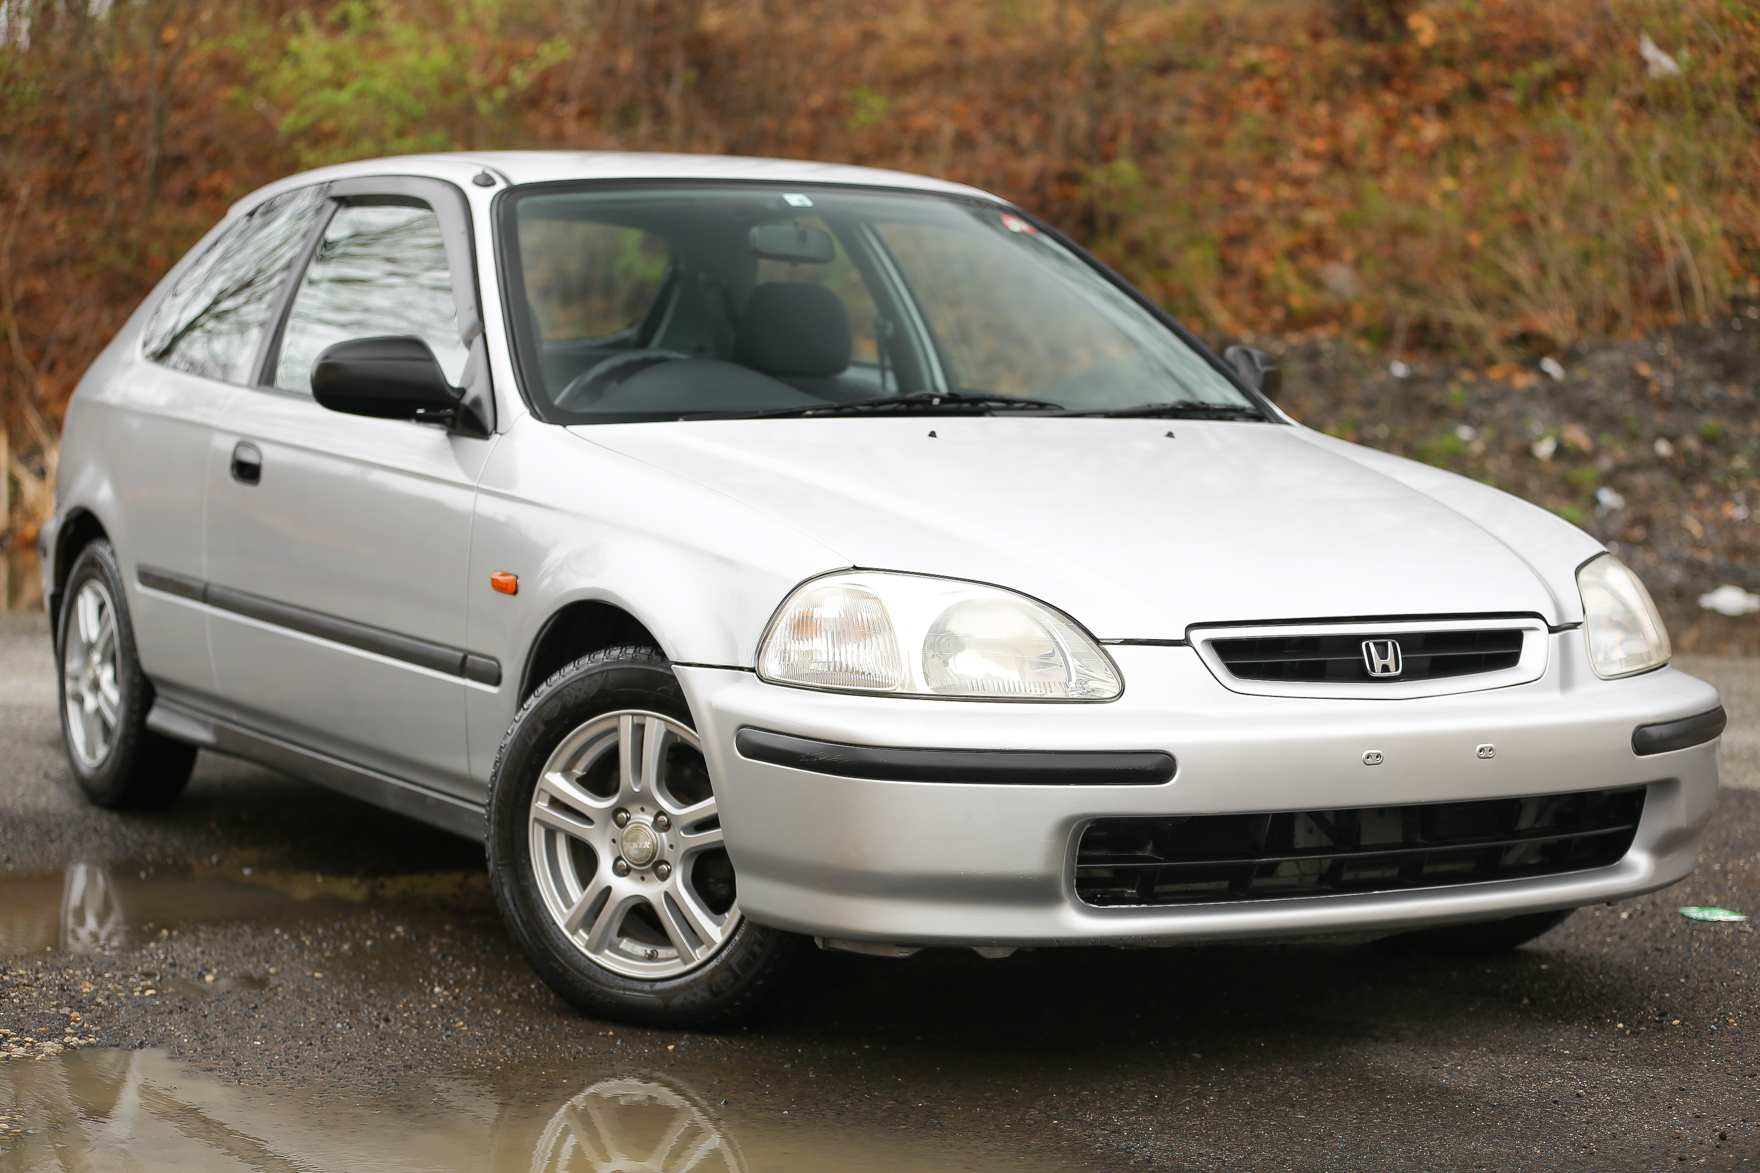 1996 Honda Civic EL - Available for $13,500